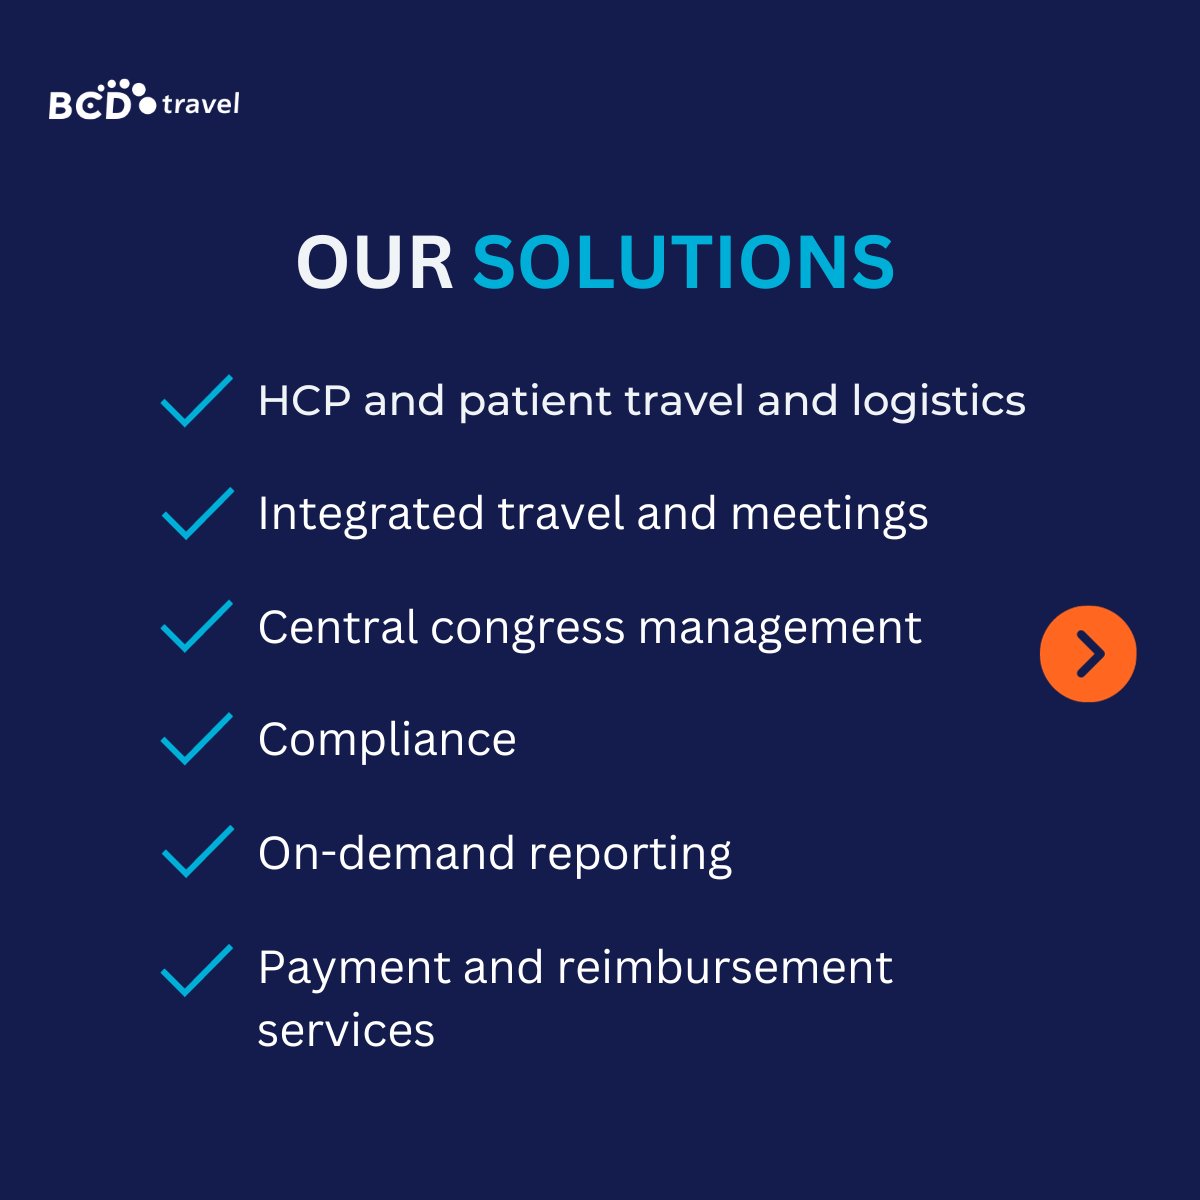 We support customers across the healthcare spectrum from pharmaceuticals, biotechs, hospital systems, CROs, insurance & beyond. A positive travel or meetings experience can be a reputational differentiator for your organization. #patientcentricity #HCPtravel #lifesciences